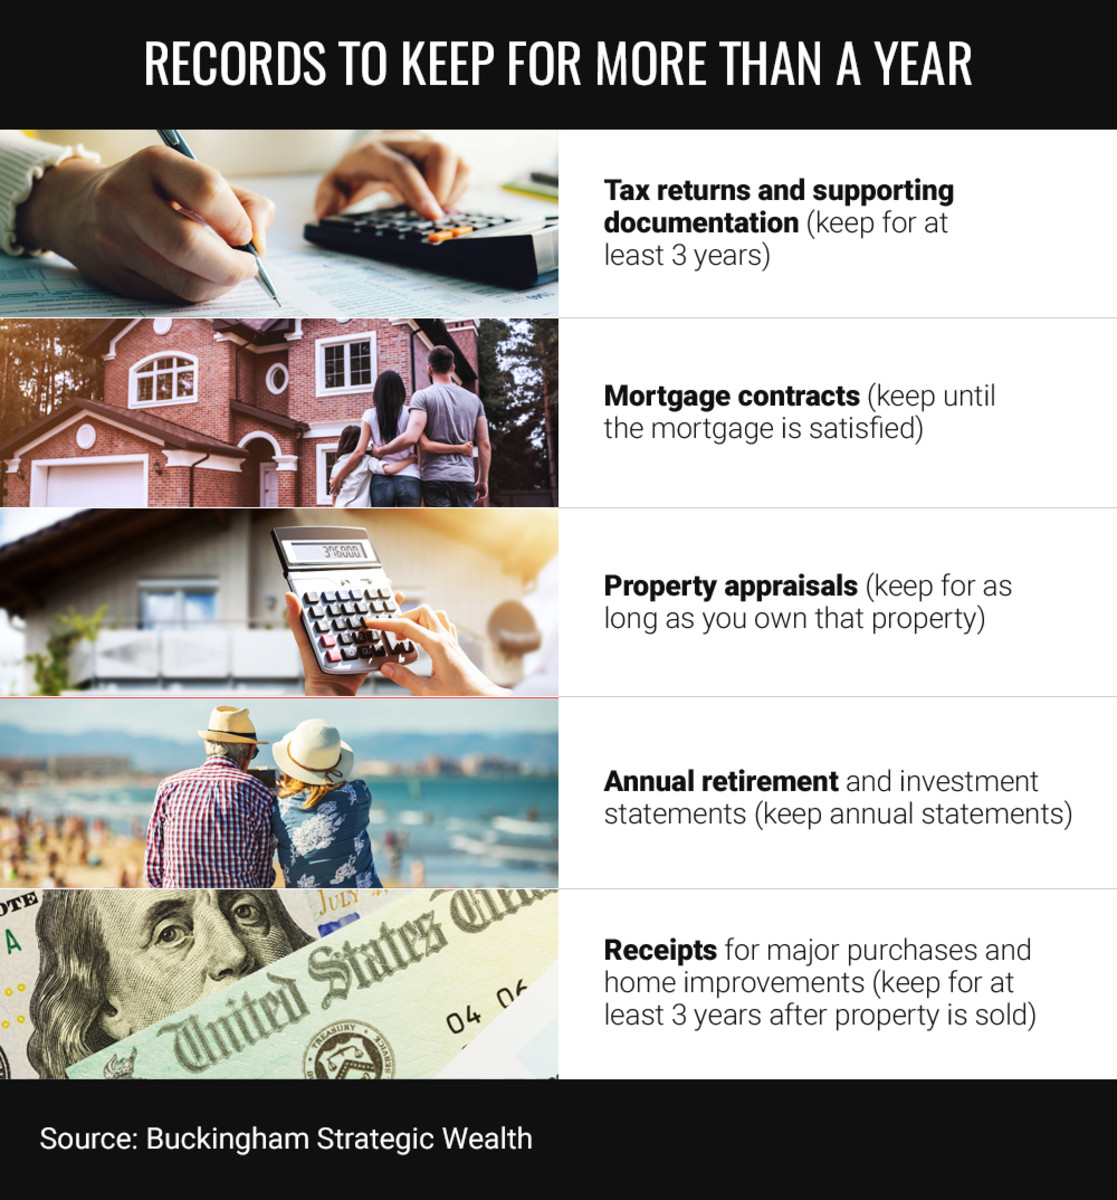 CHART-Records-To-Keep-More-than-a-year-0322